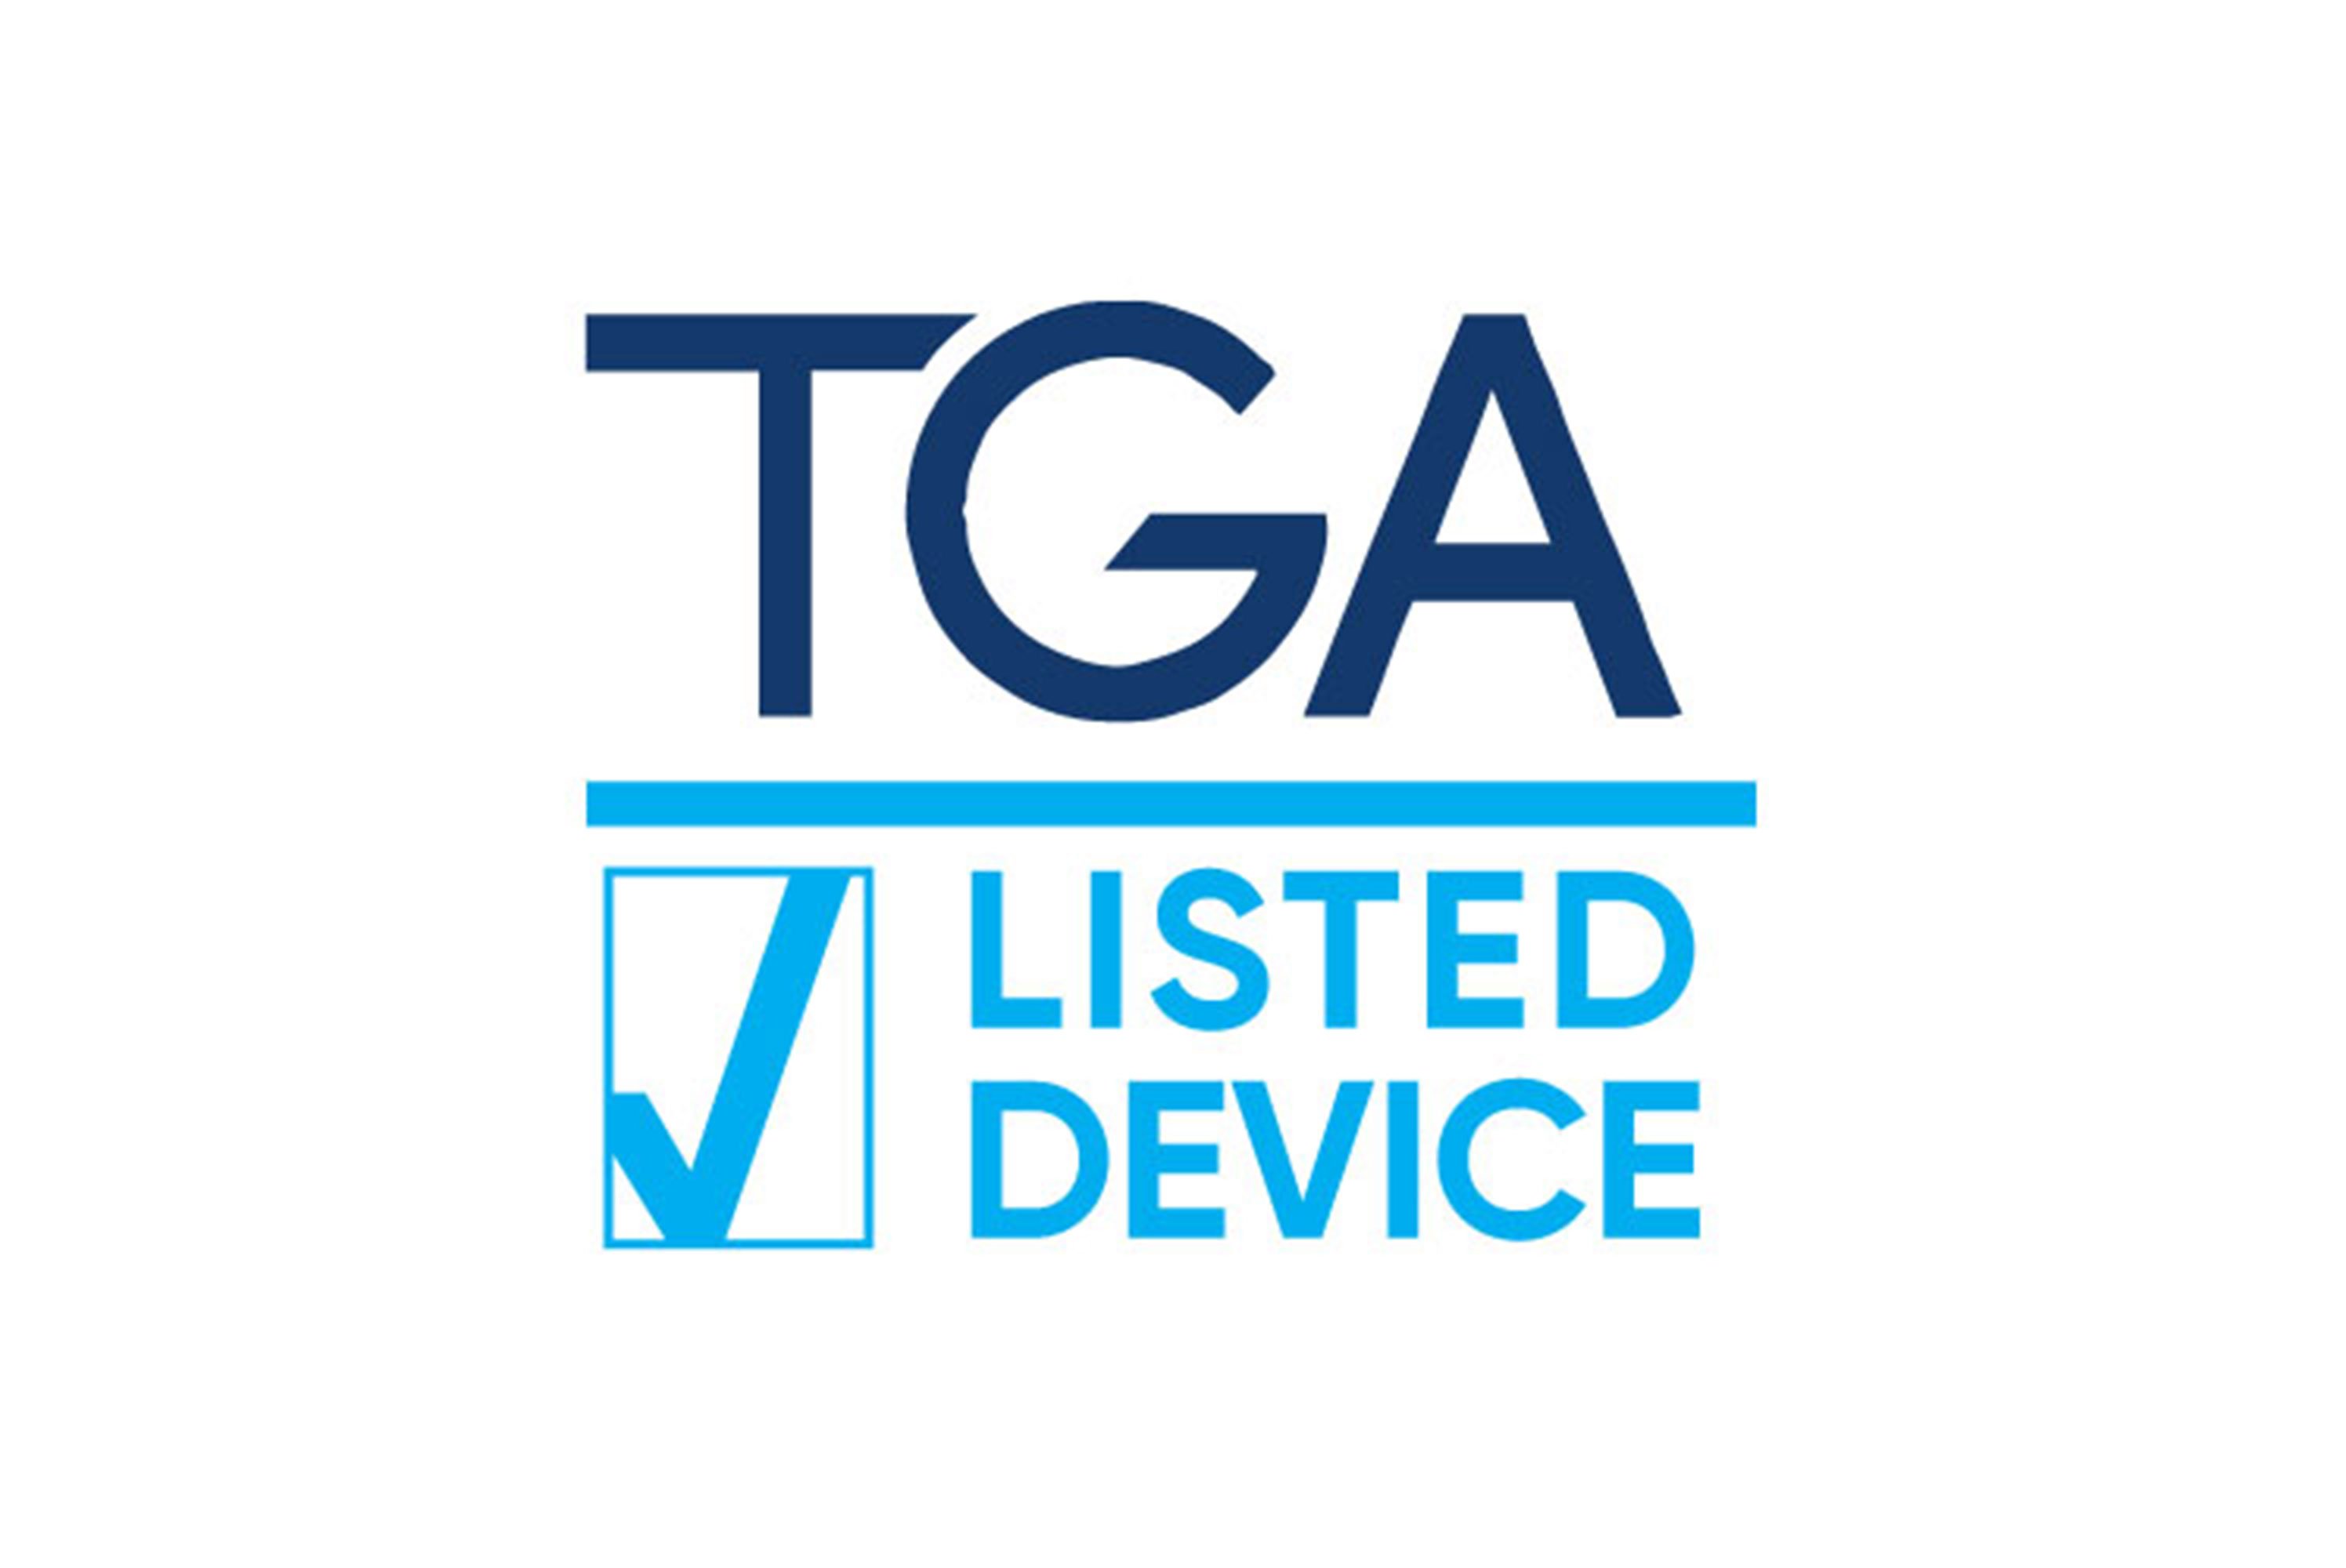 Certification - TGA Listed Device